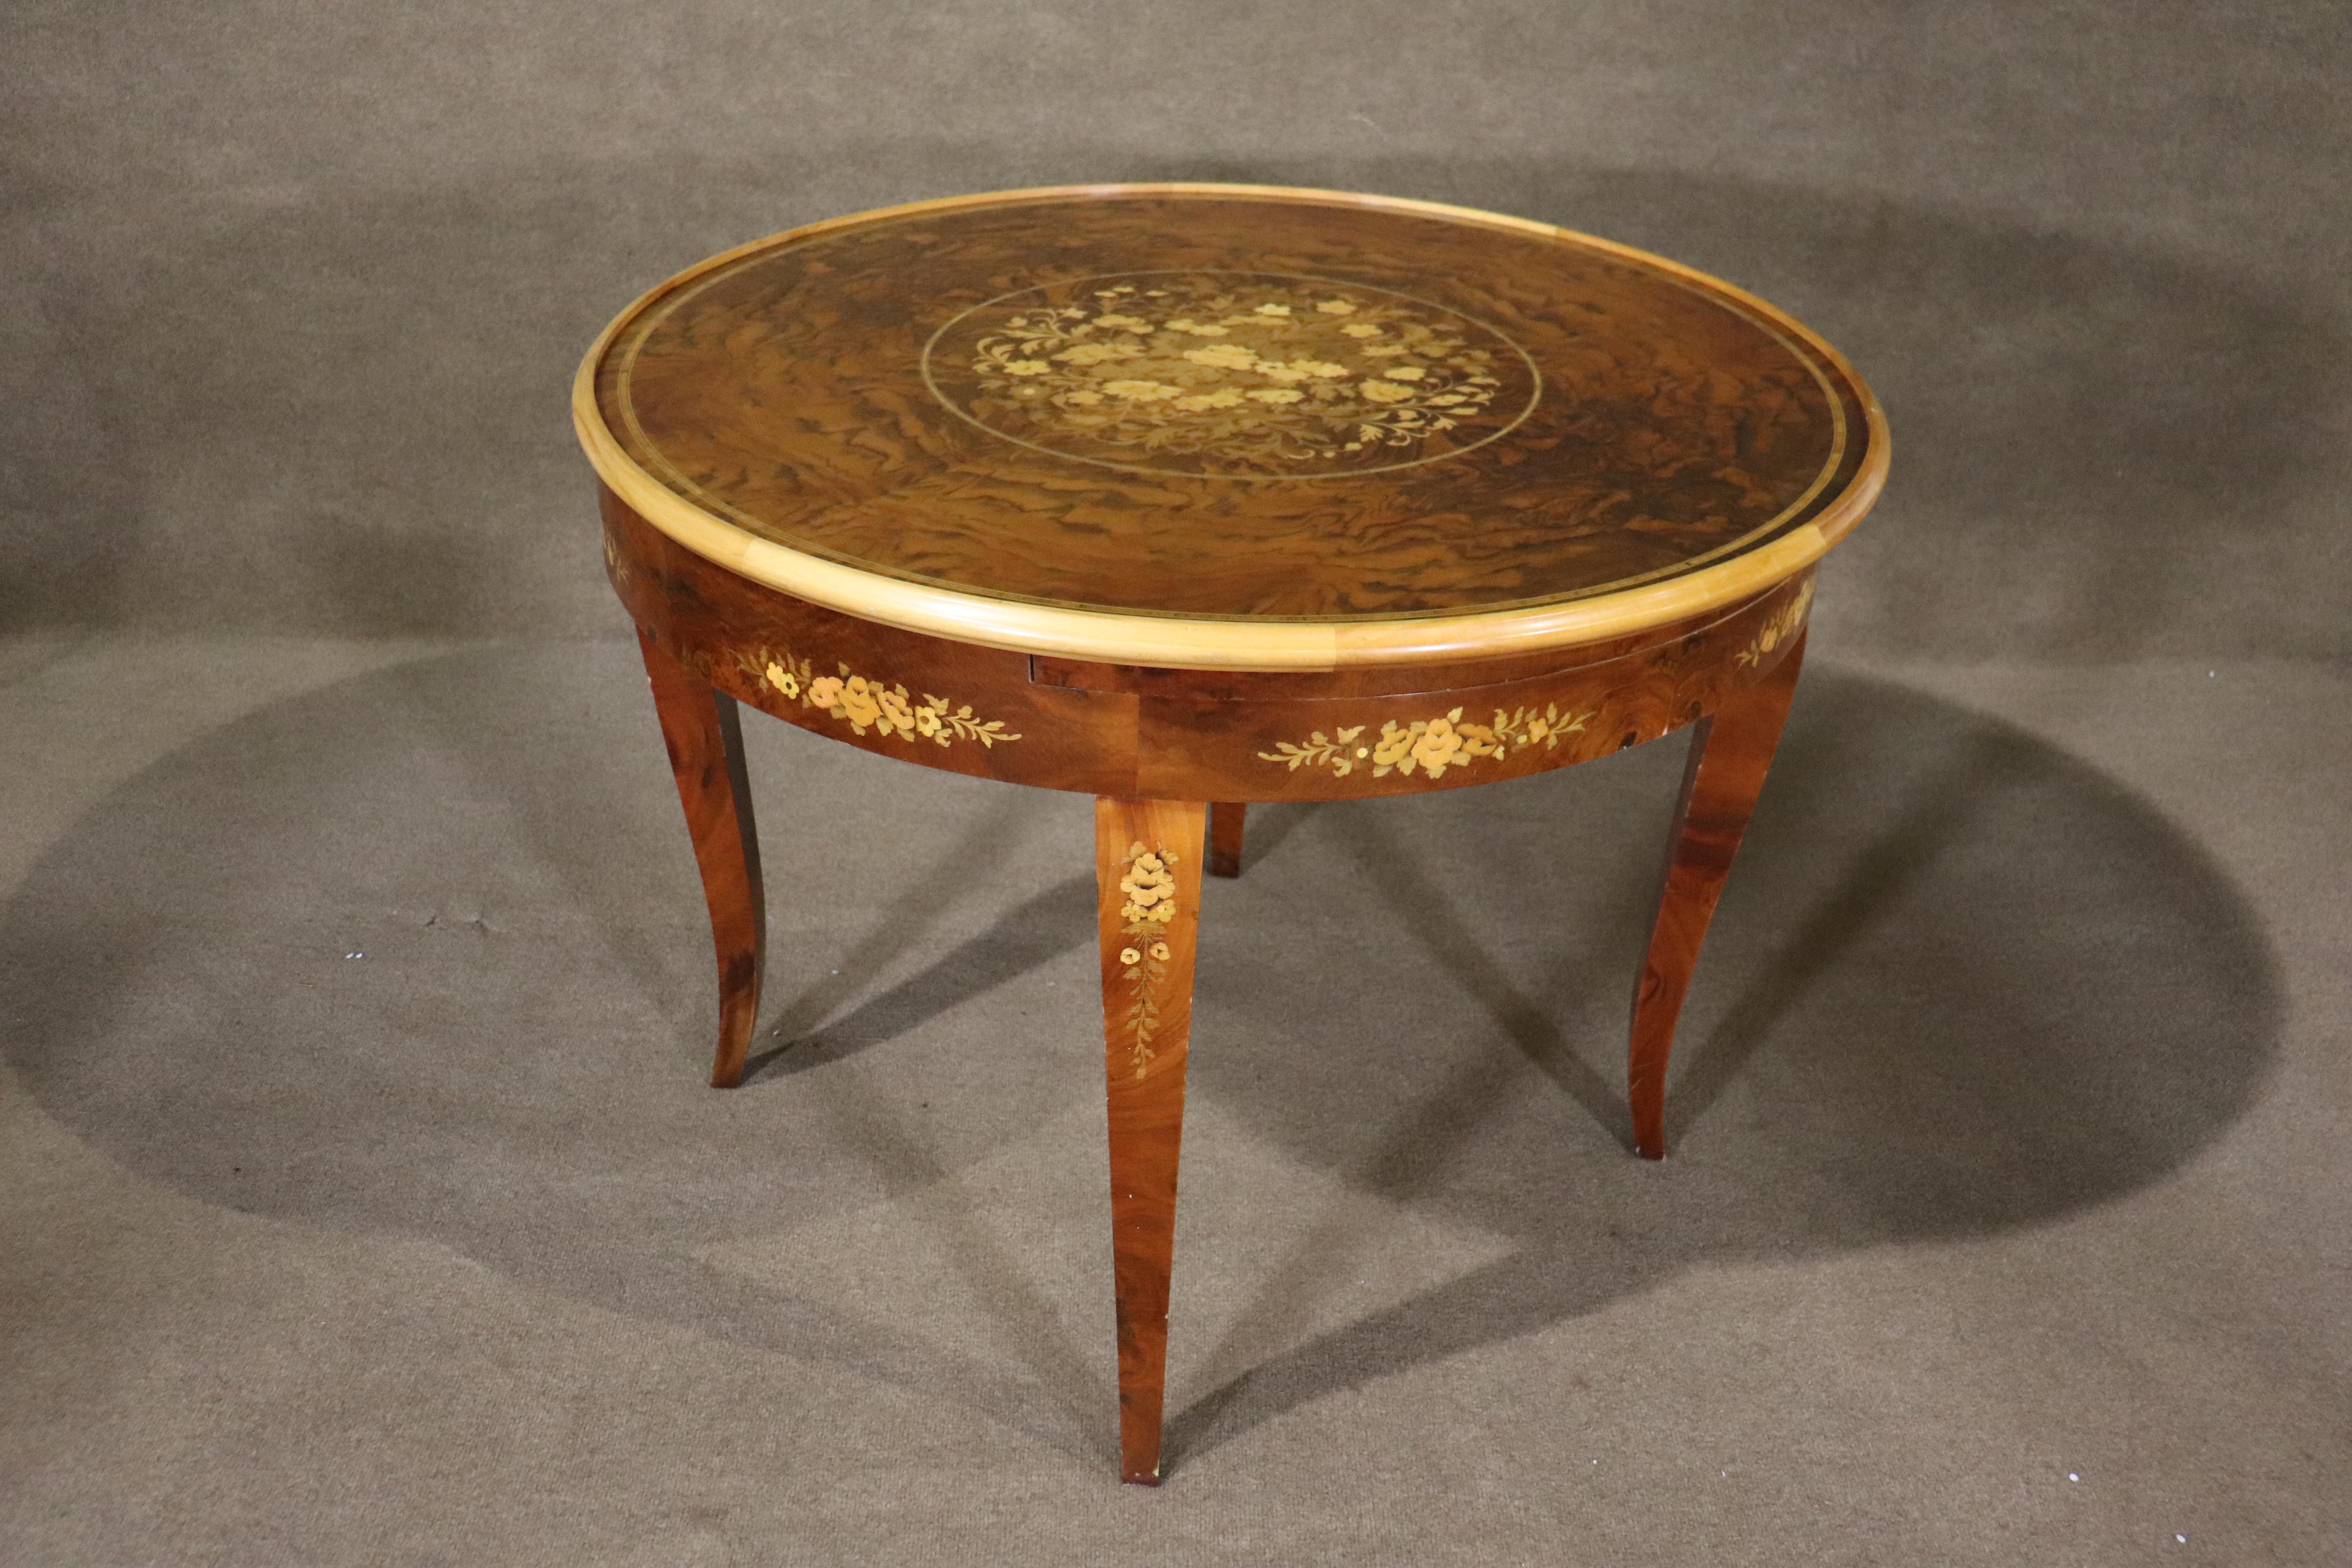 Beautiful Italian game table with marquetry inlay designs. The top is exquisite and comes off to reveal a chess board, backgammon, and roulette games.
Please confirm location NY or NJ